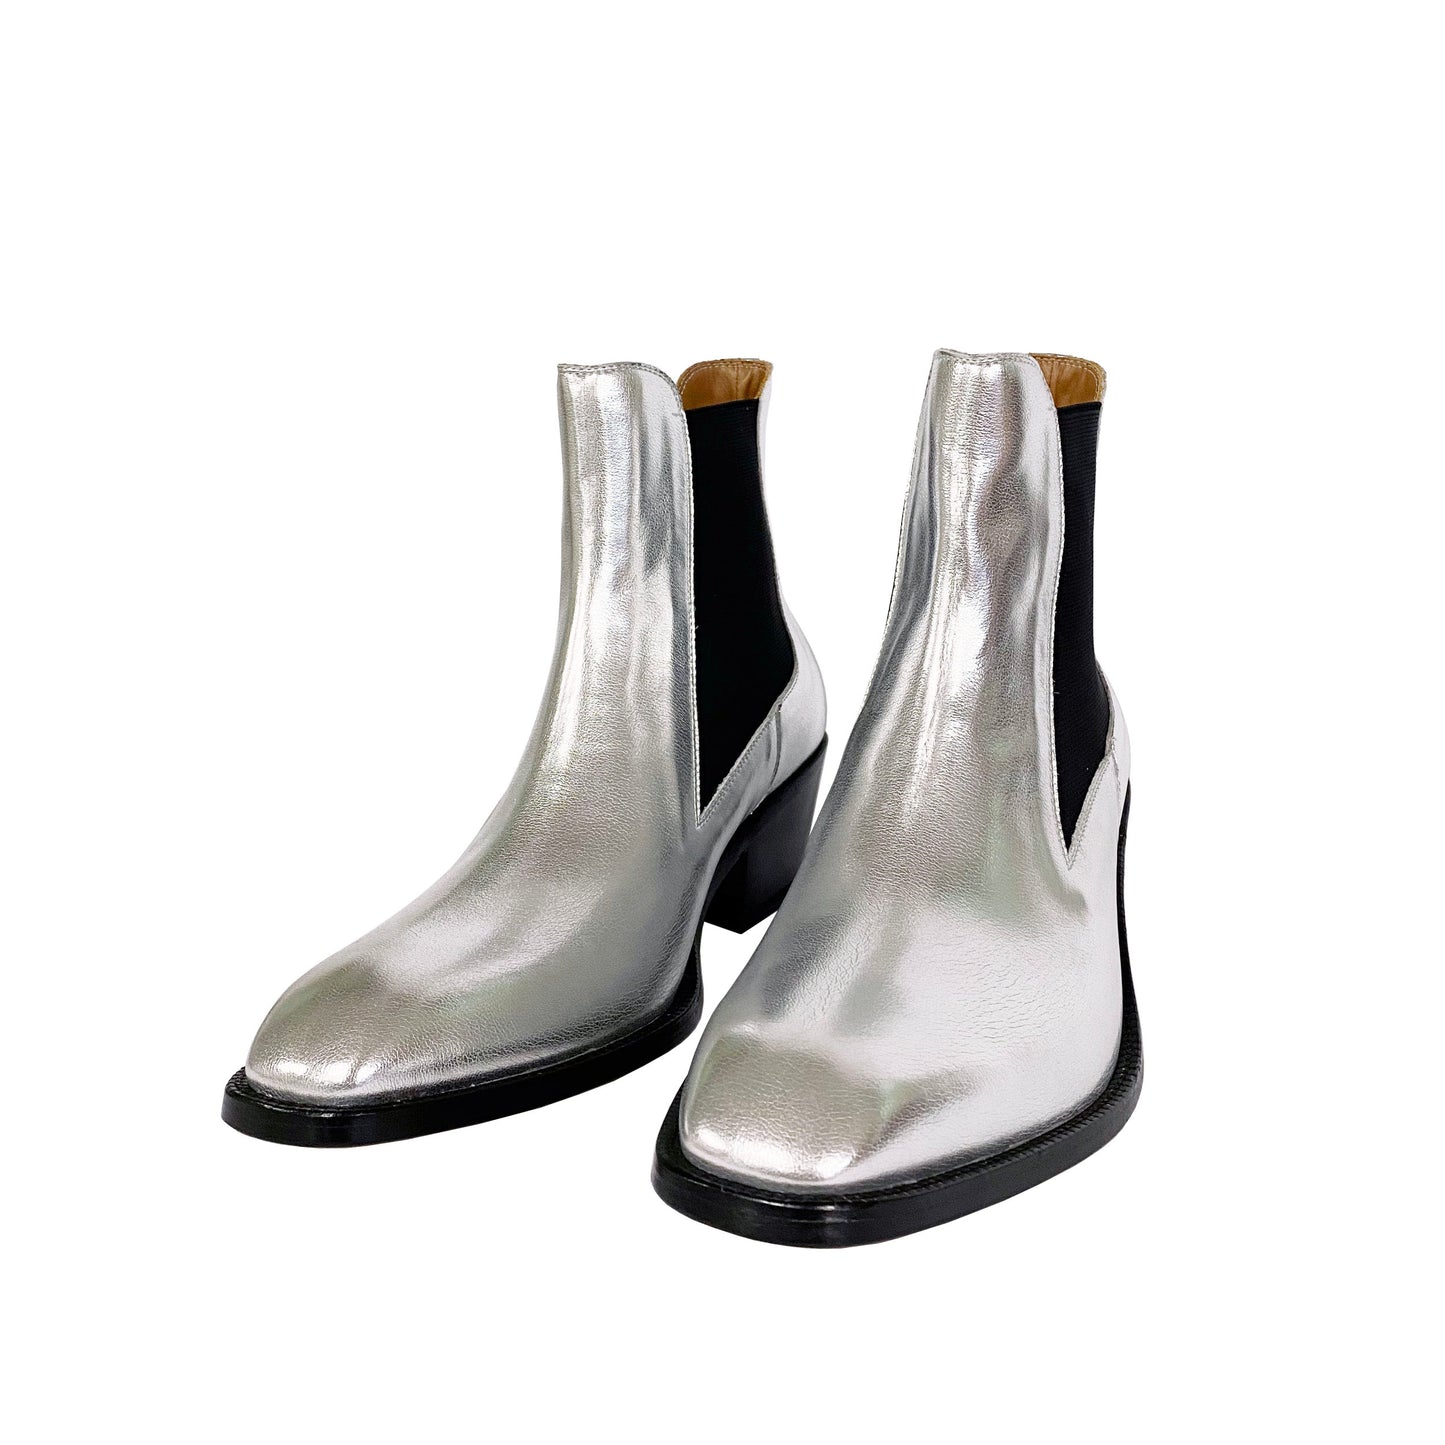 Briar Chelsea Boot in Moonlight Silver